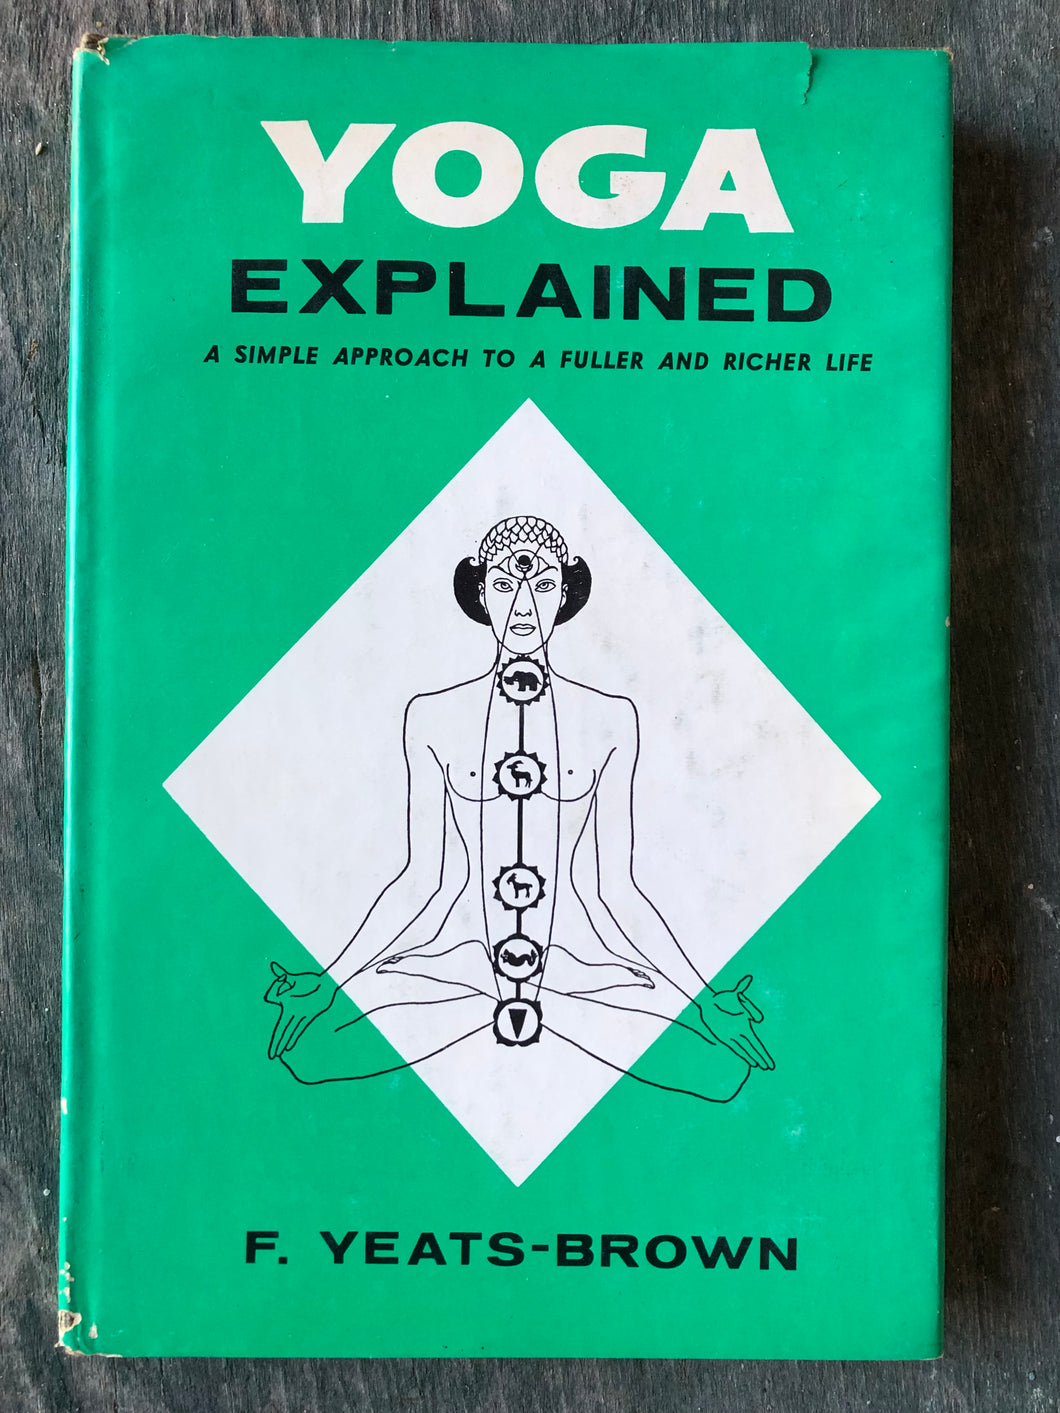 Yoga Explained by F. Yeats-Brown